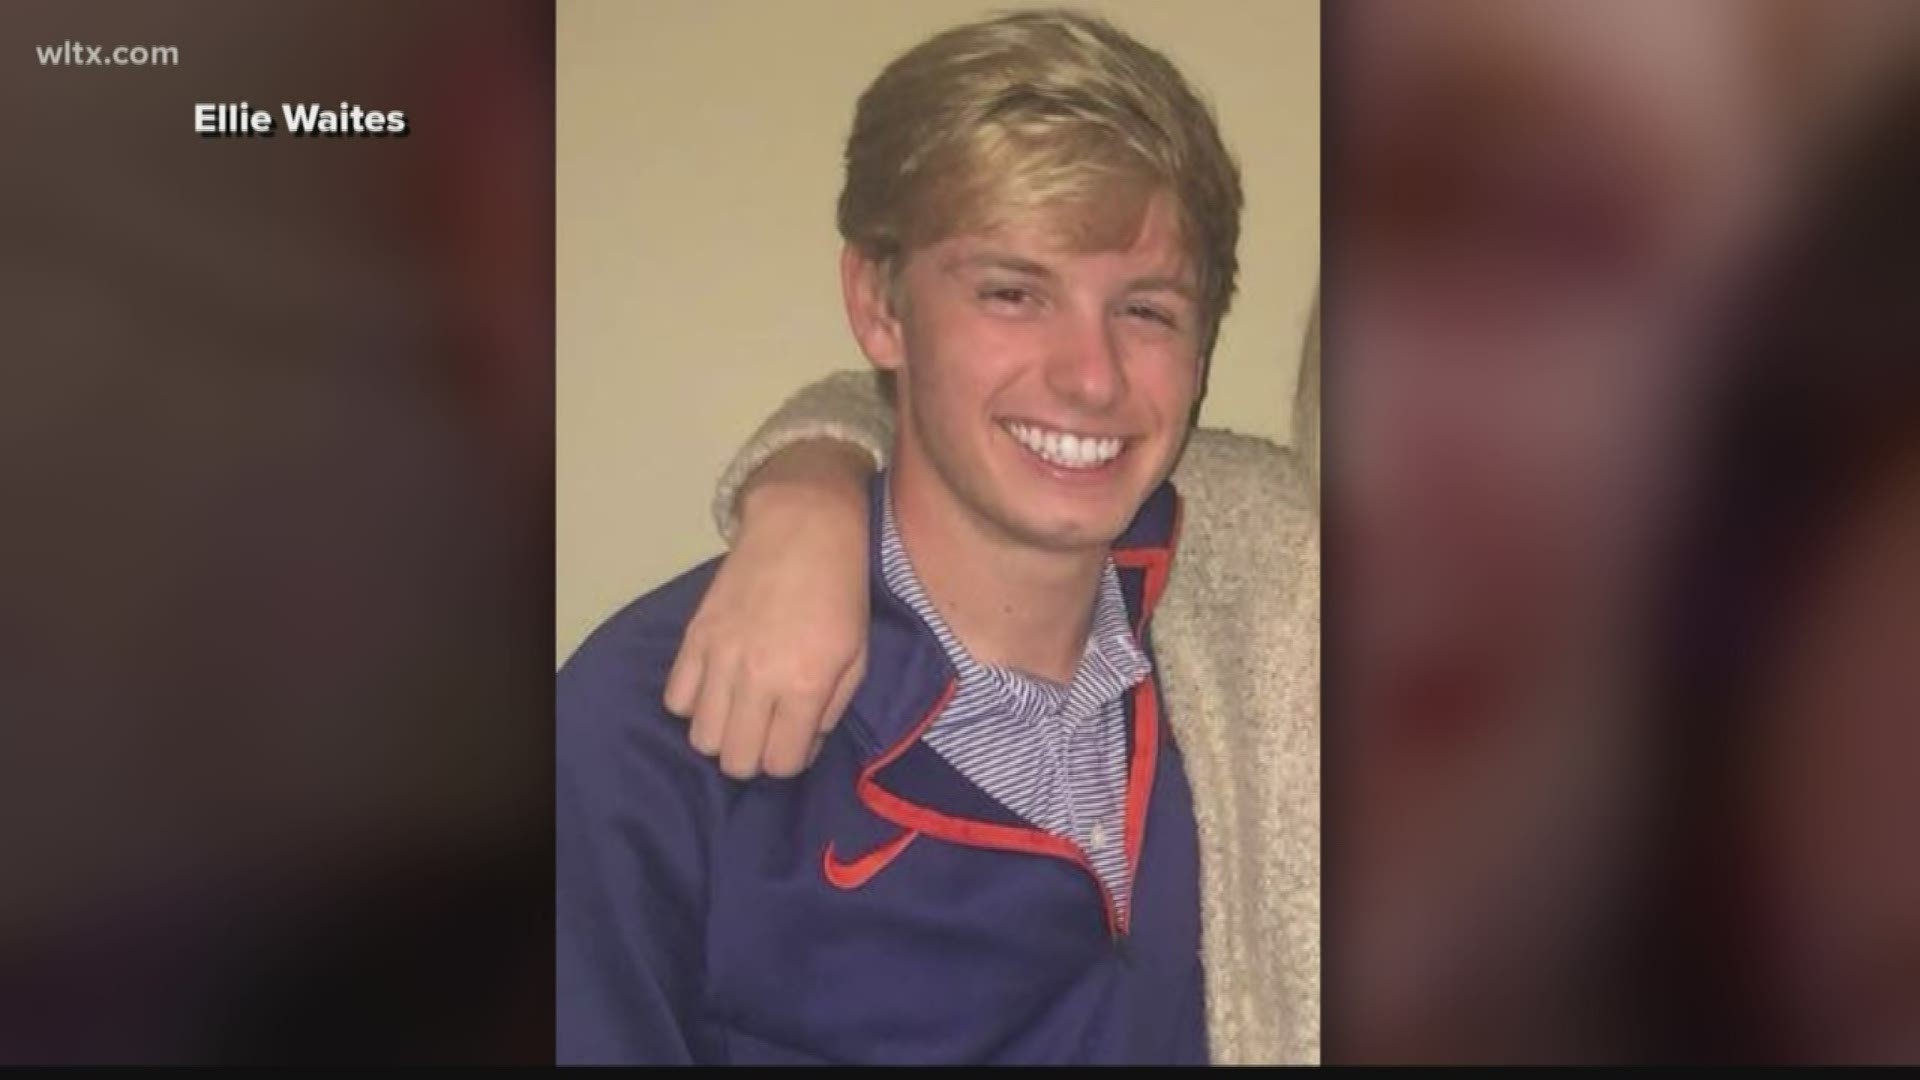 Thomas Few, 20 was a construction science management major at Clemson